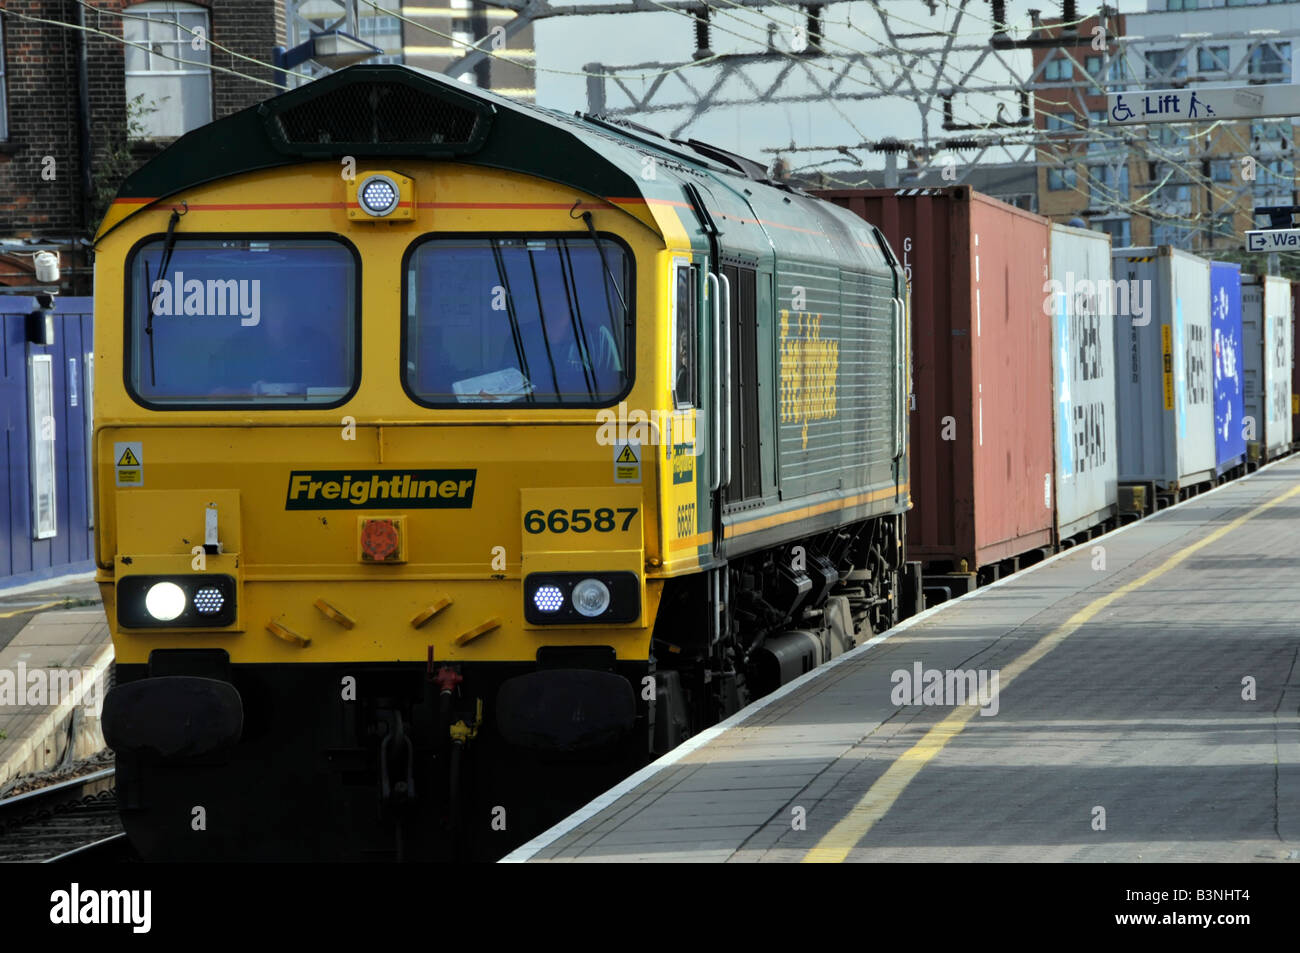 Stratford East London Freightliner locomotive 66587 with a container freight train Stock Photo